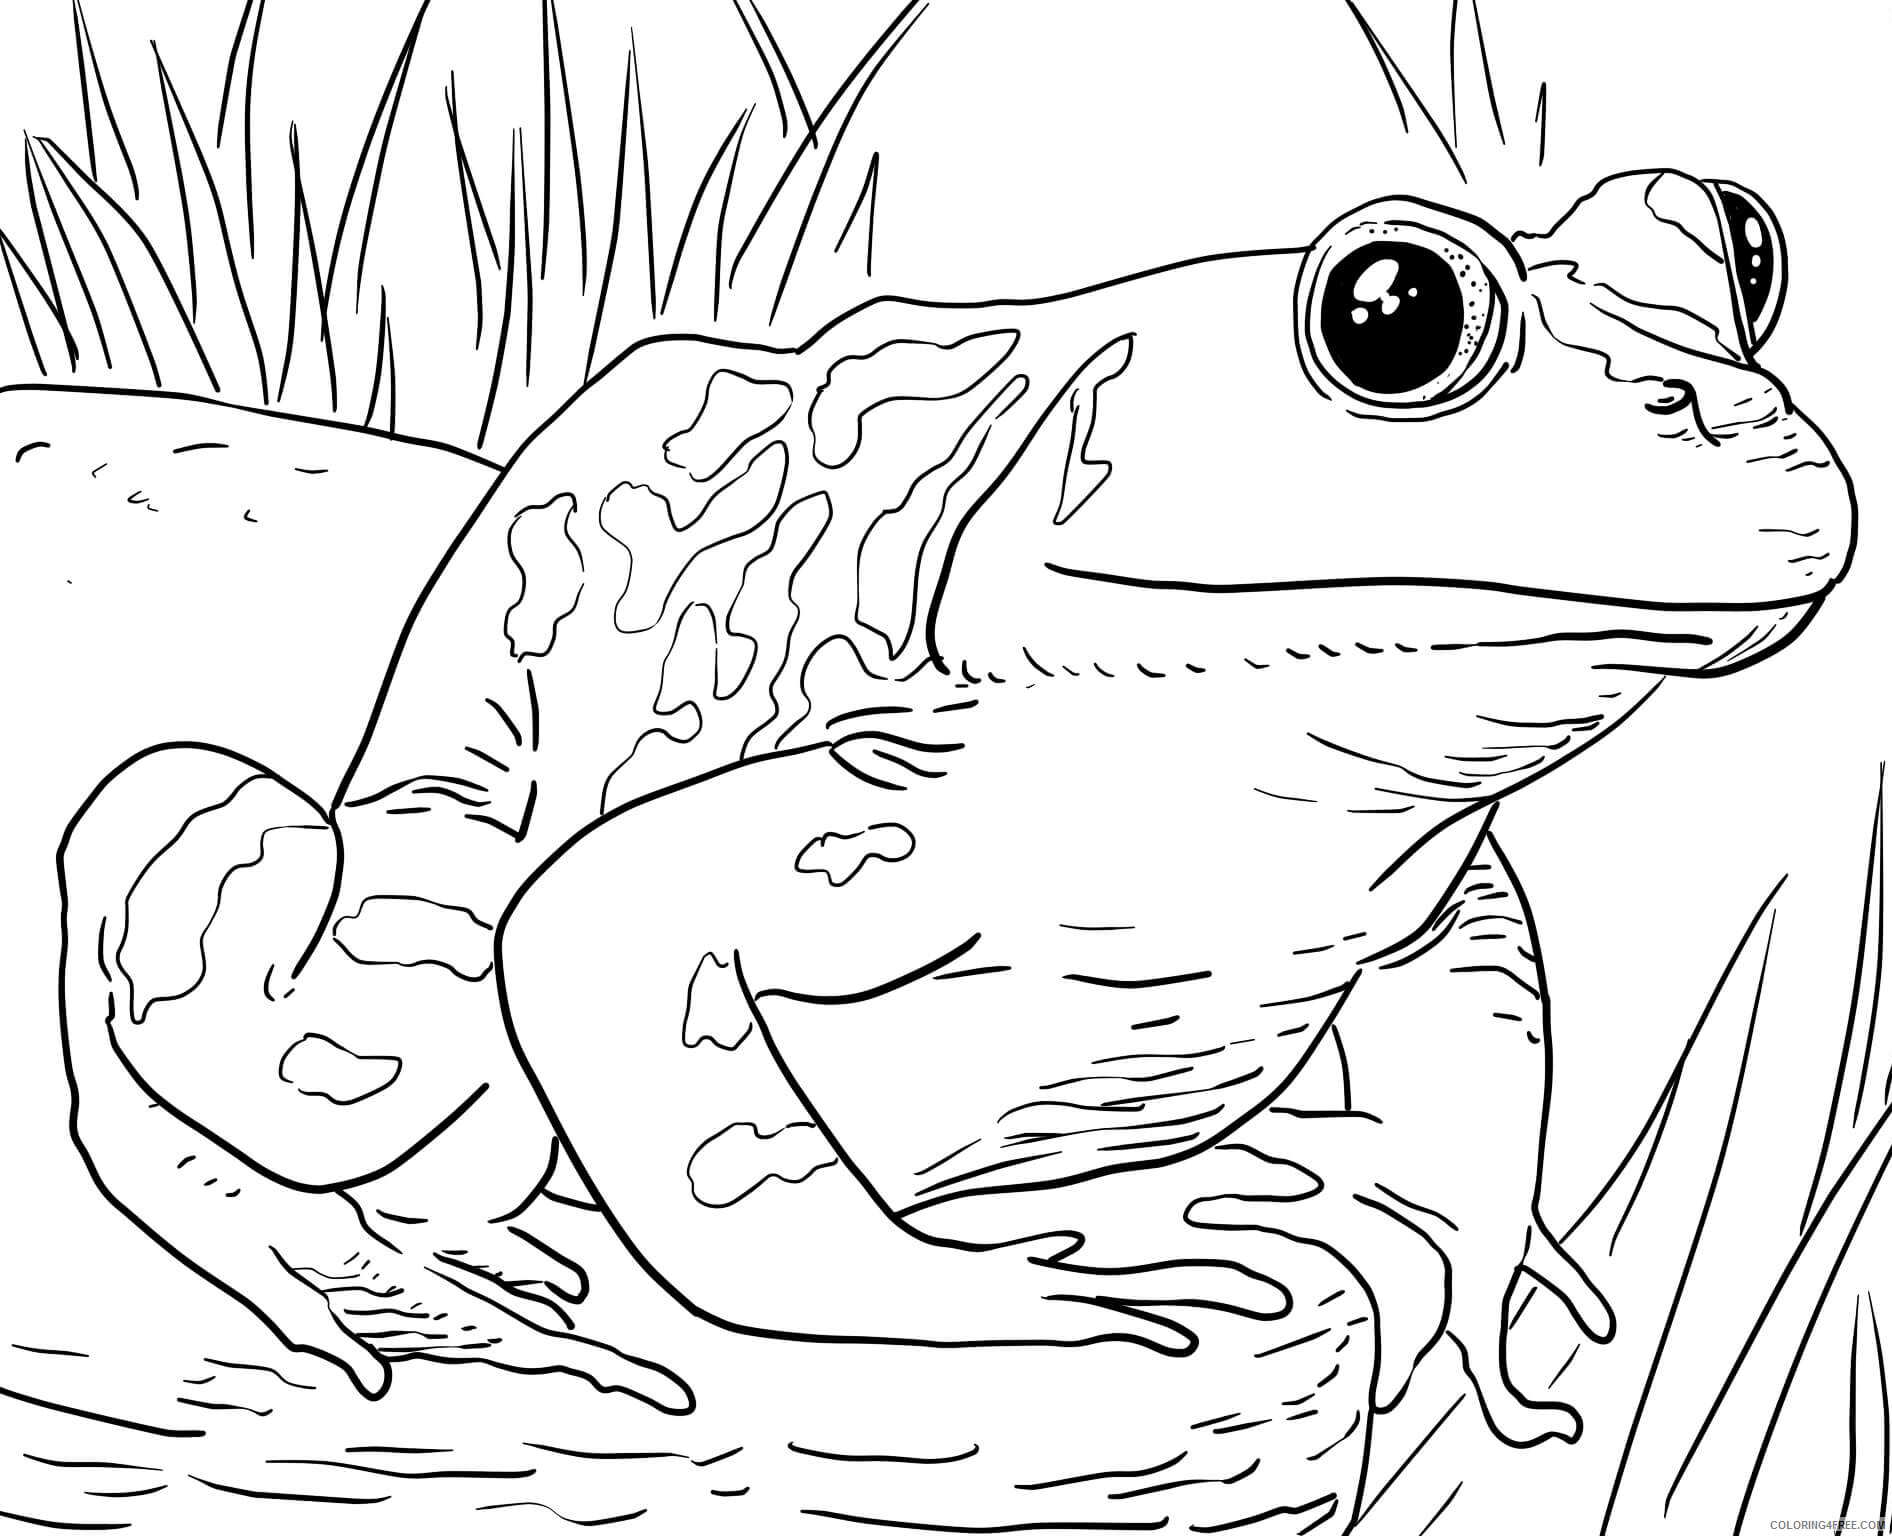 Frog Coloring Pages Animal Printable Sheets Frog Zoo Animals 2021 2332 Coloring4free